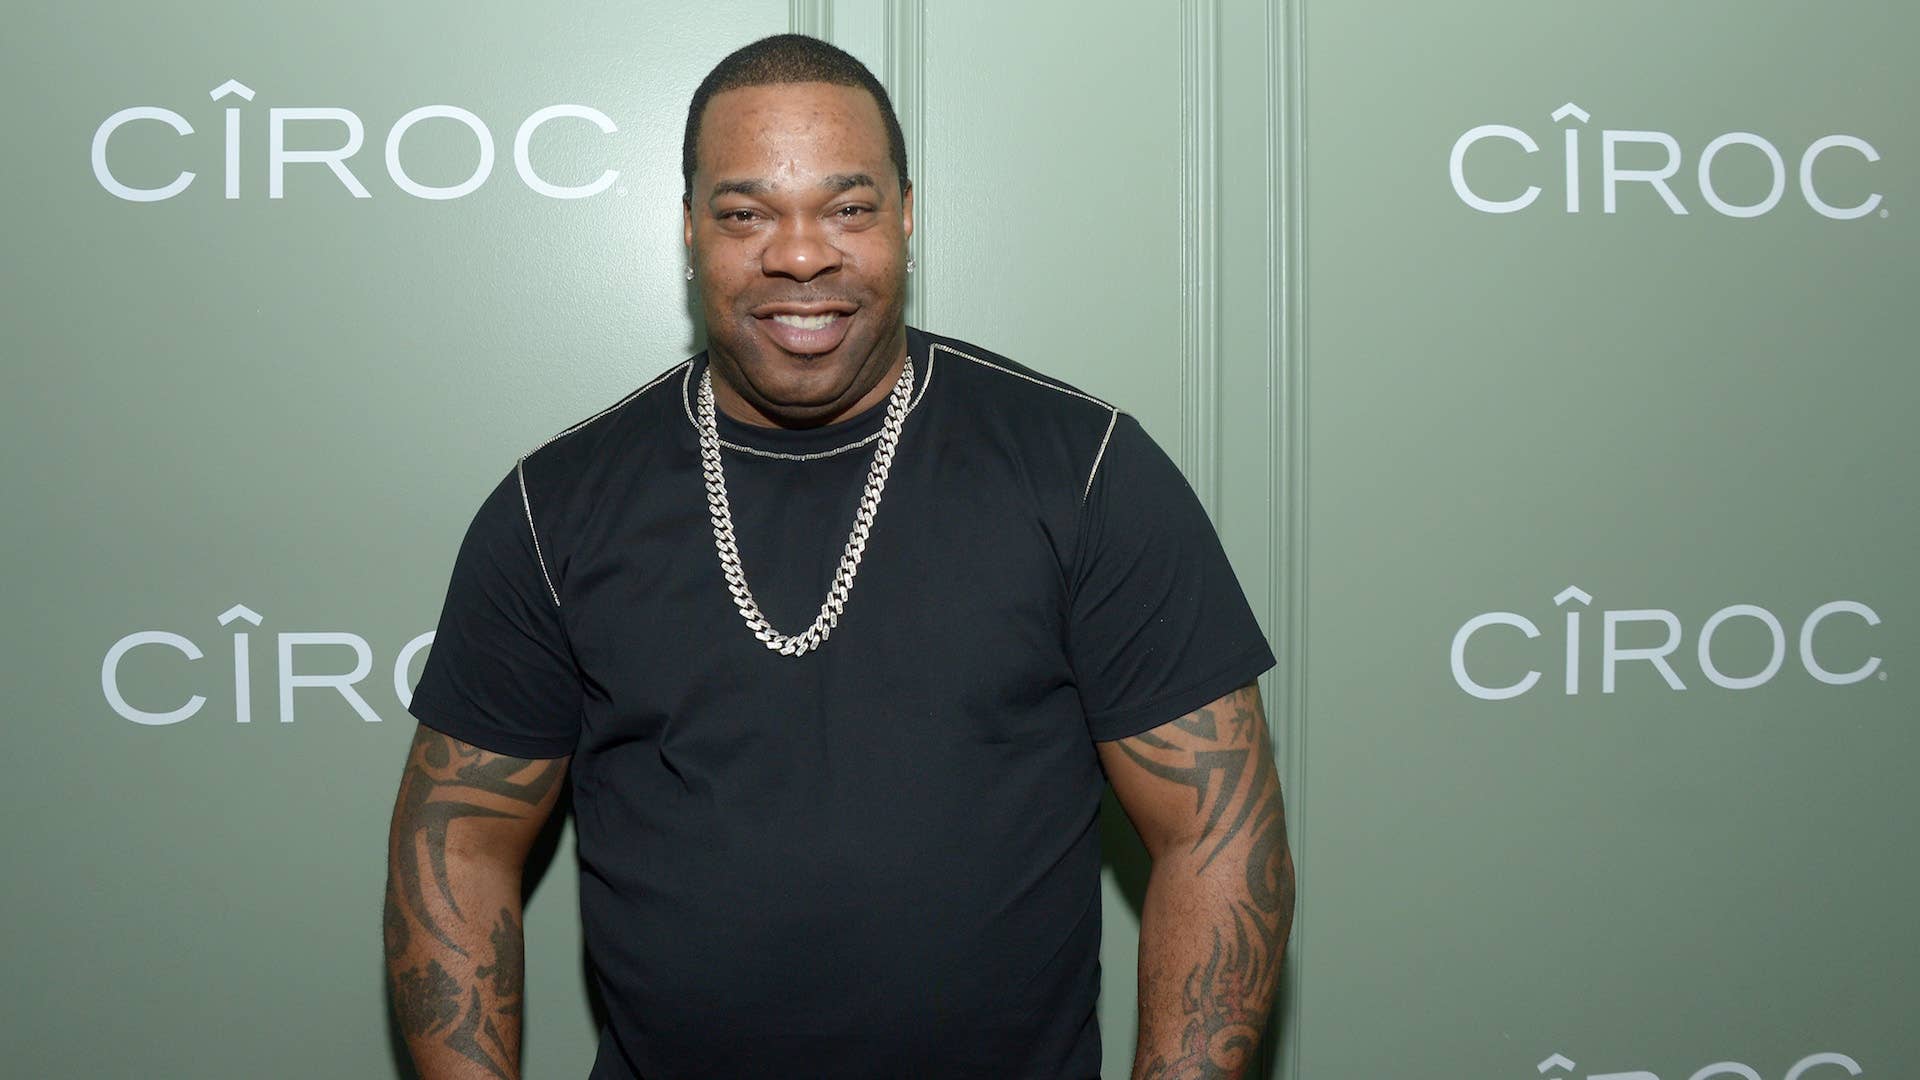 Busta Rhymes attends the "King of the Dancehall" premiere screening party.